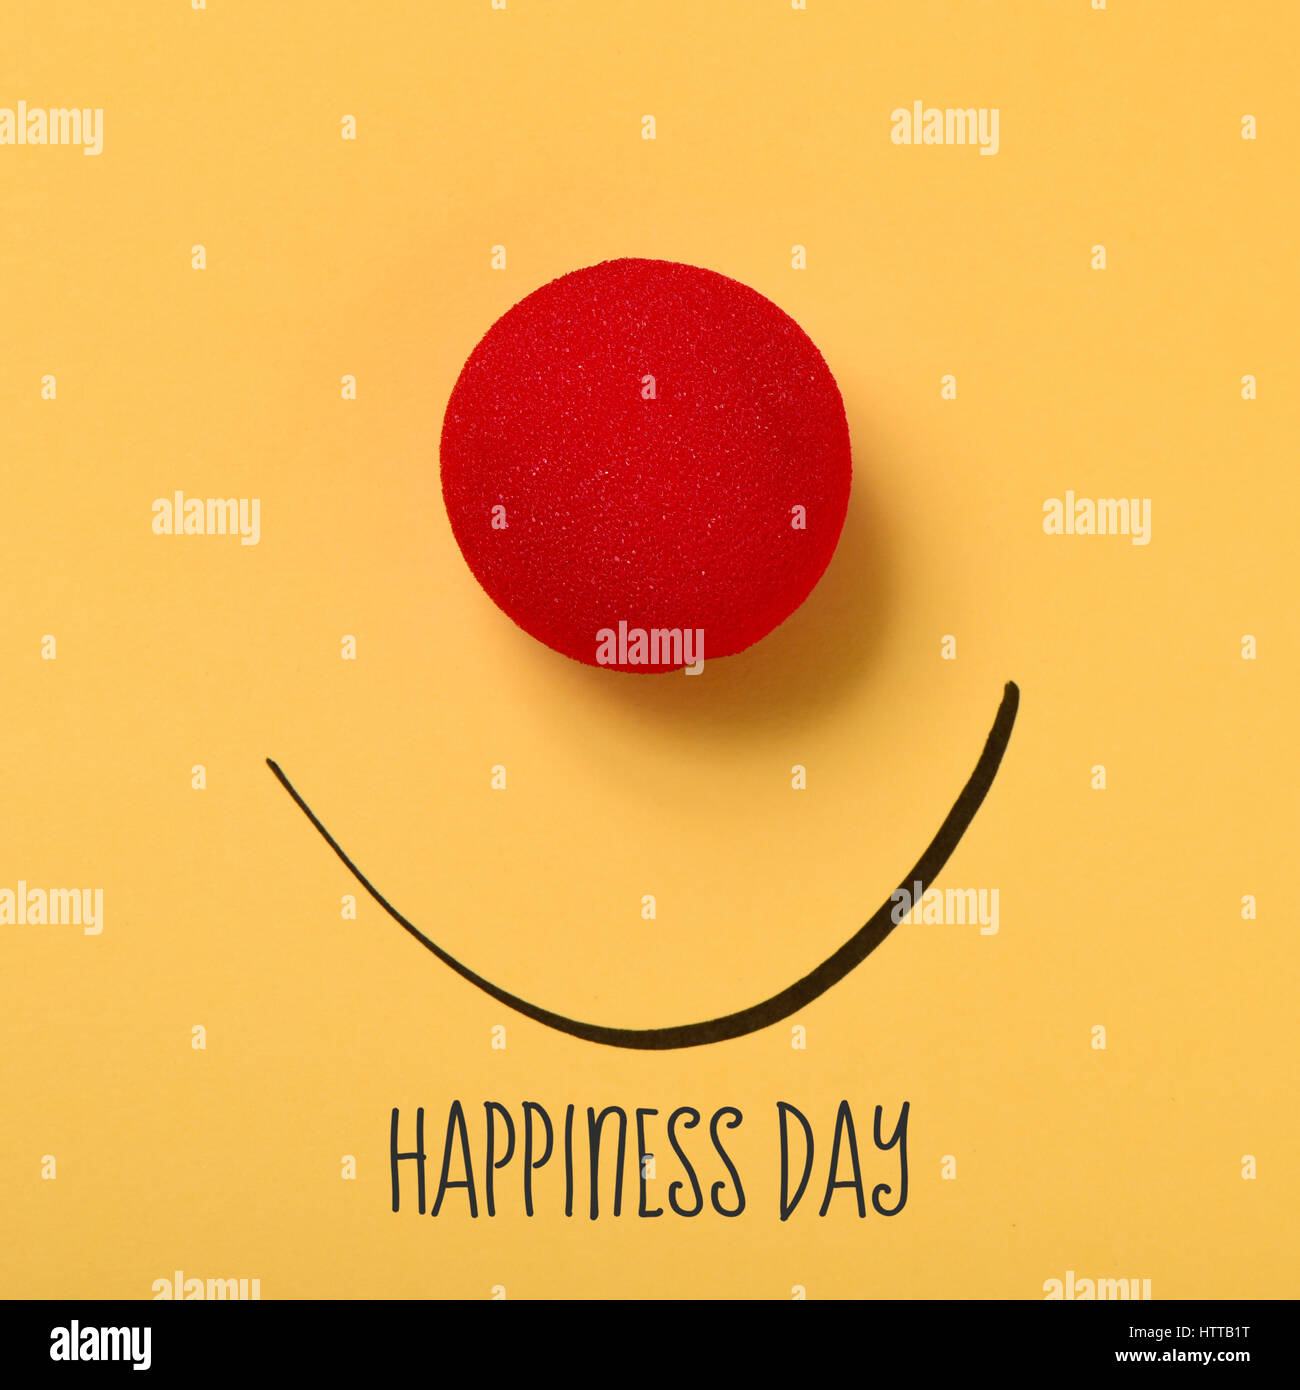 the text happiness day, a red clown nose and a smile drawn on a yellow background Stock Photo